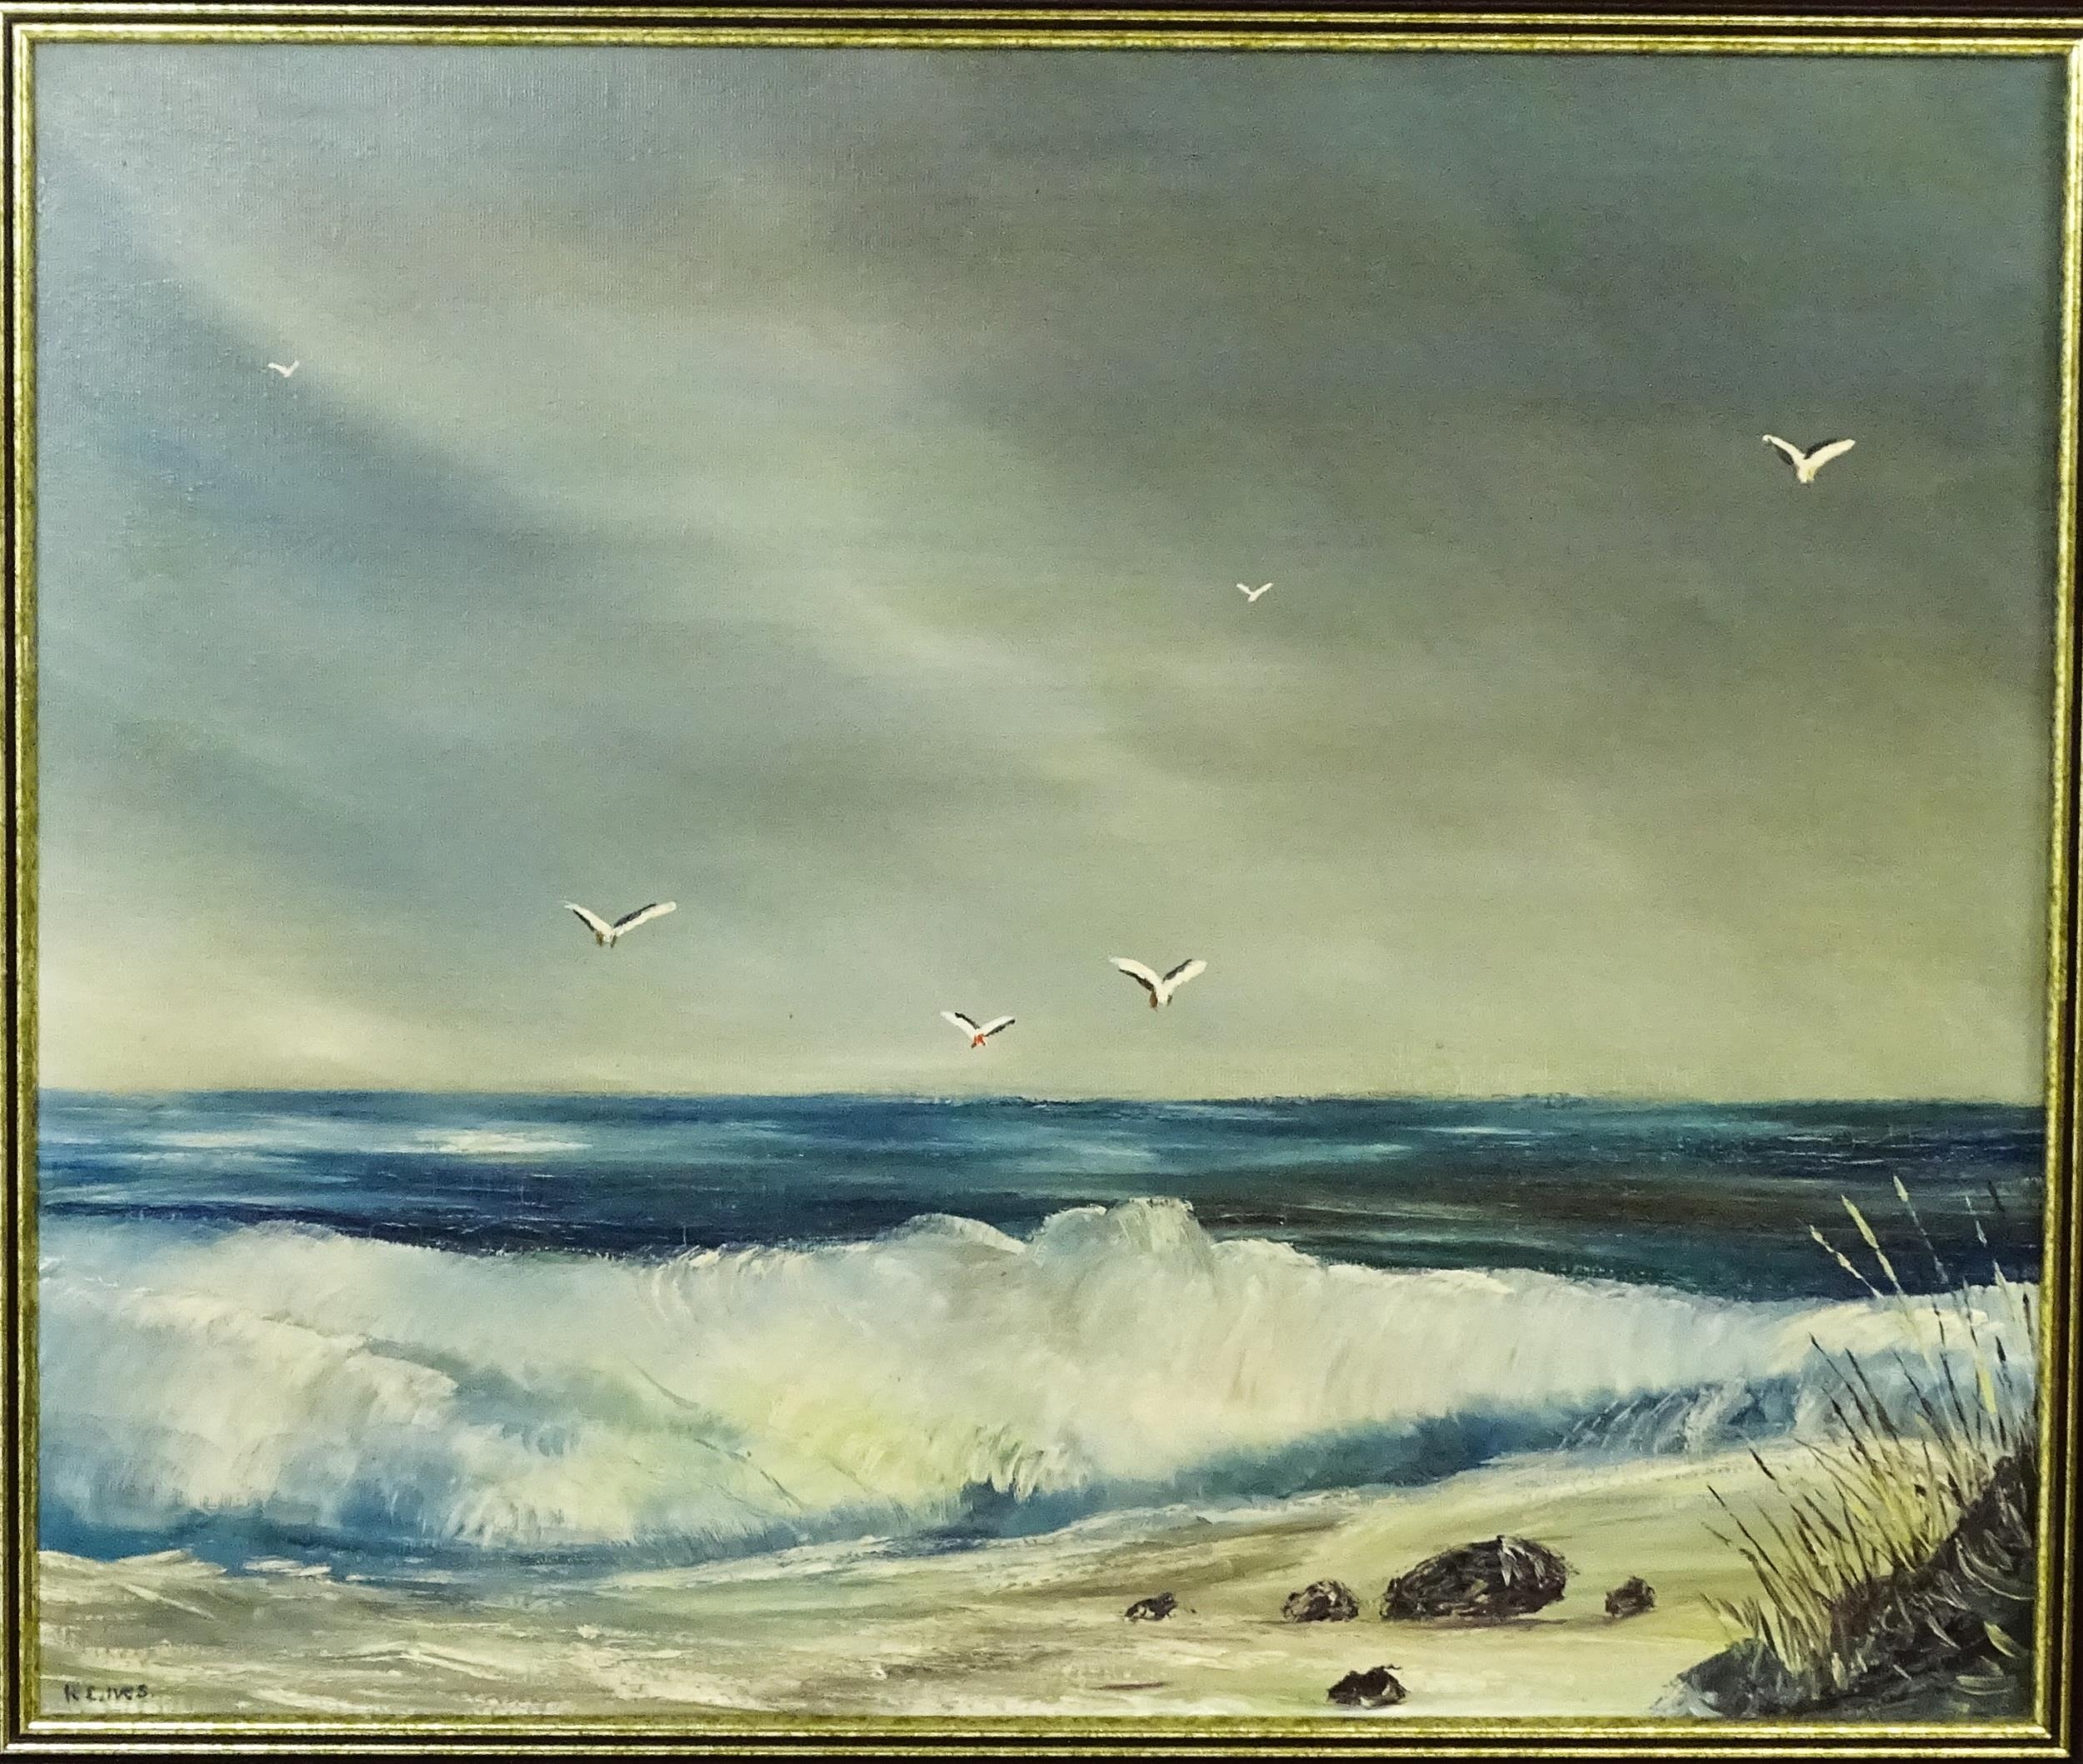 R. C. Ives, 20th century, Oil on canvas, A seascape with crashing waves and gulls in flight. - Image 3 of 4